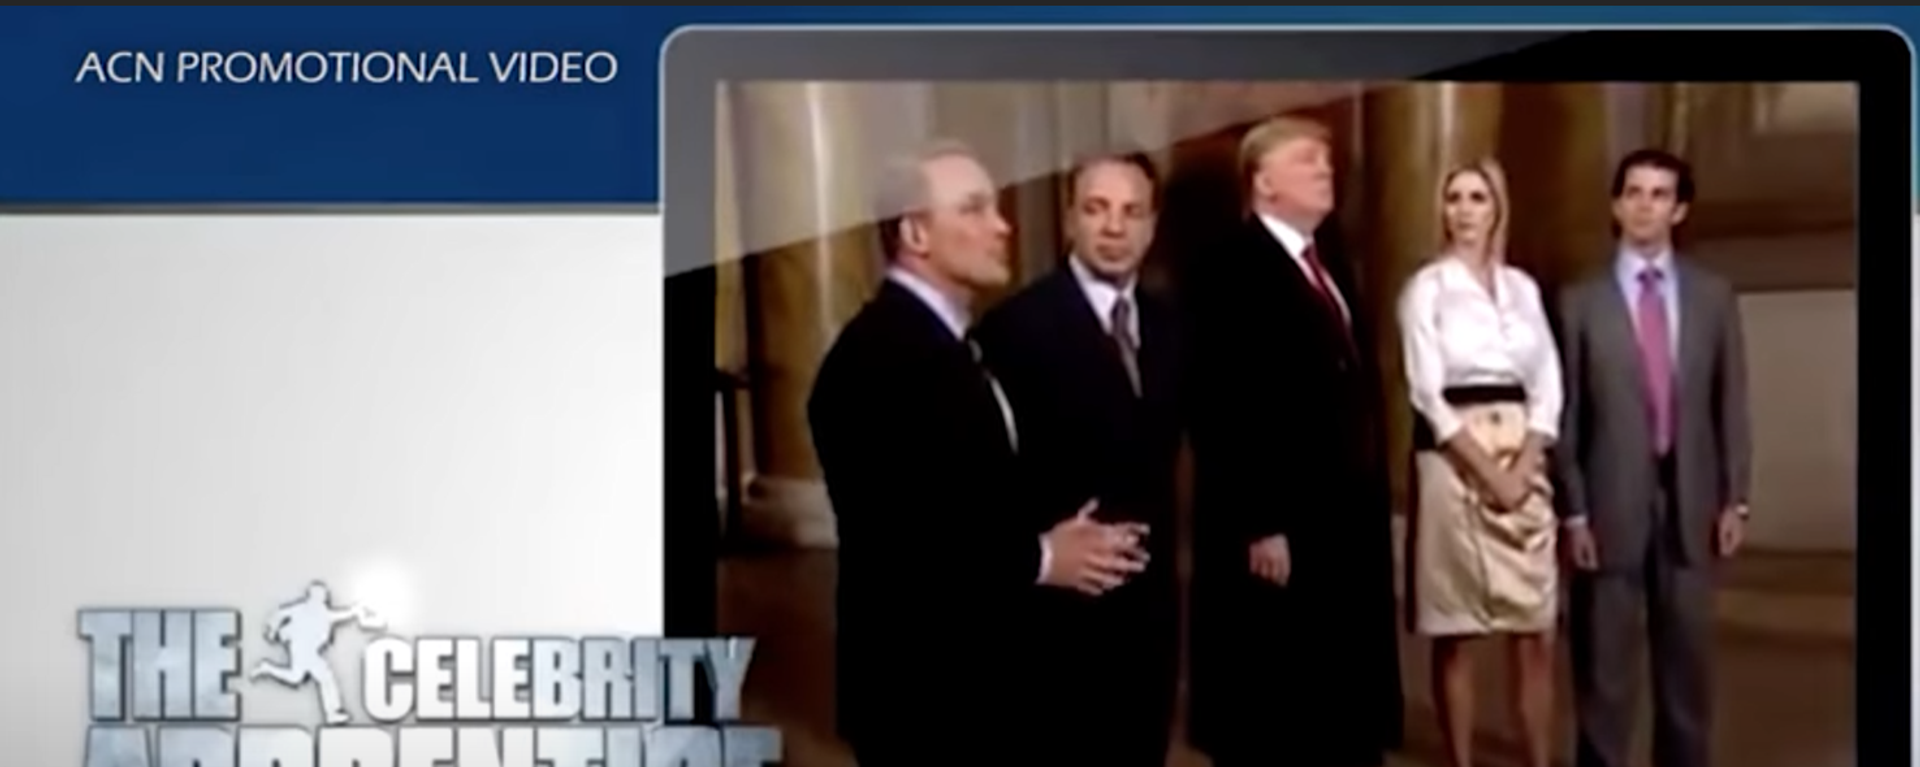 ACN featured on The Celebrity Apprentice, hosted by executive producer Donald Trump  - Sputnik International, 1920, 26.03.2022